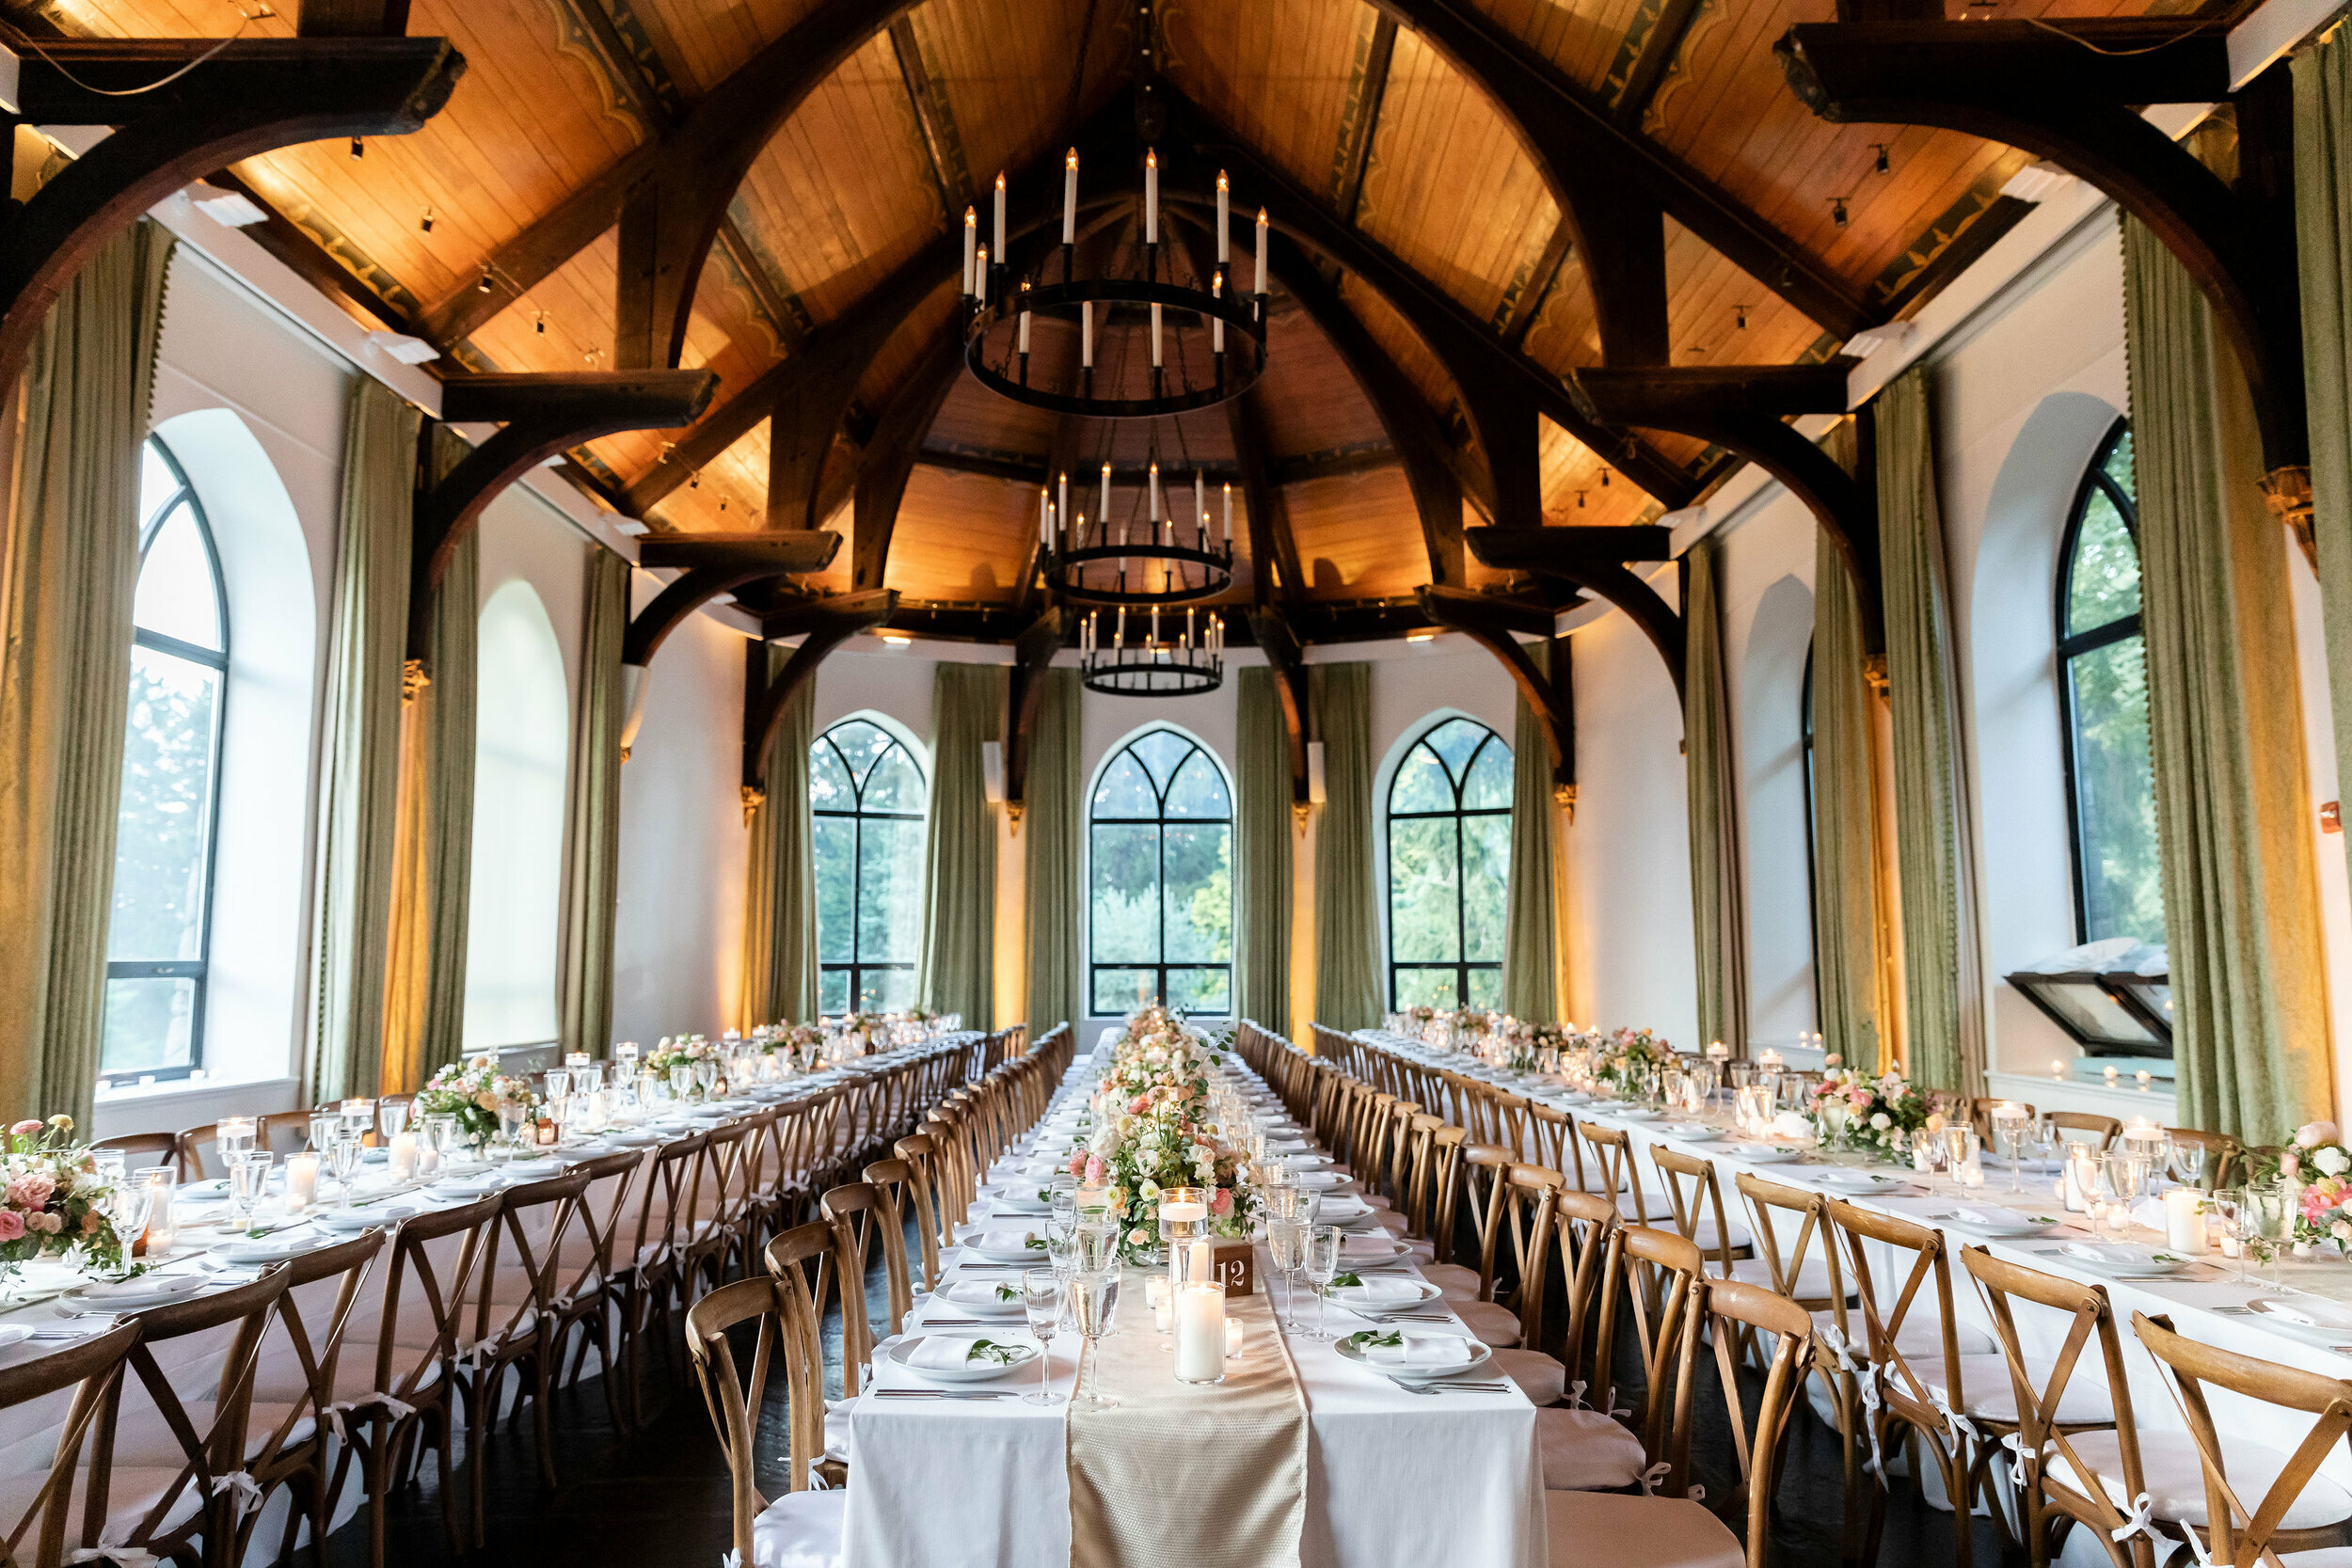 Our Favorite Wedding Venues, Inside and Out